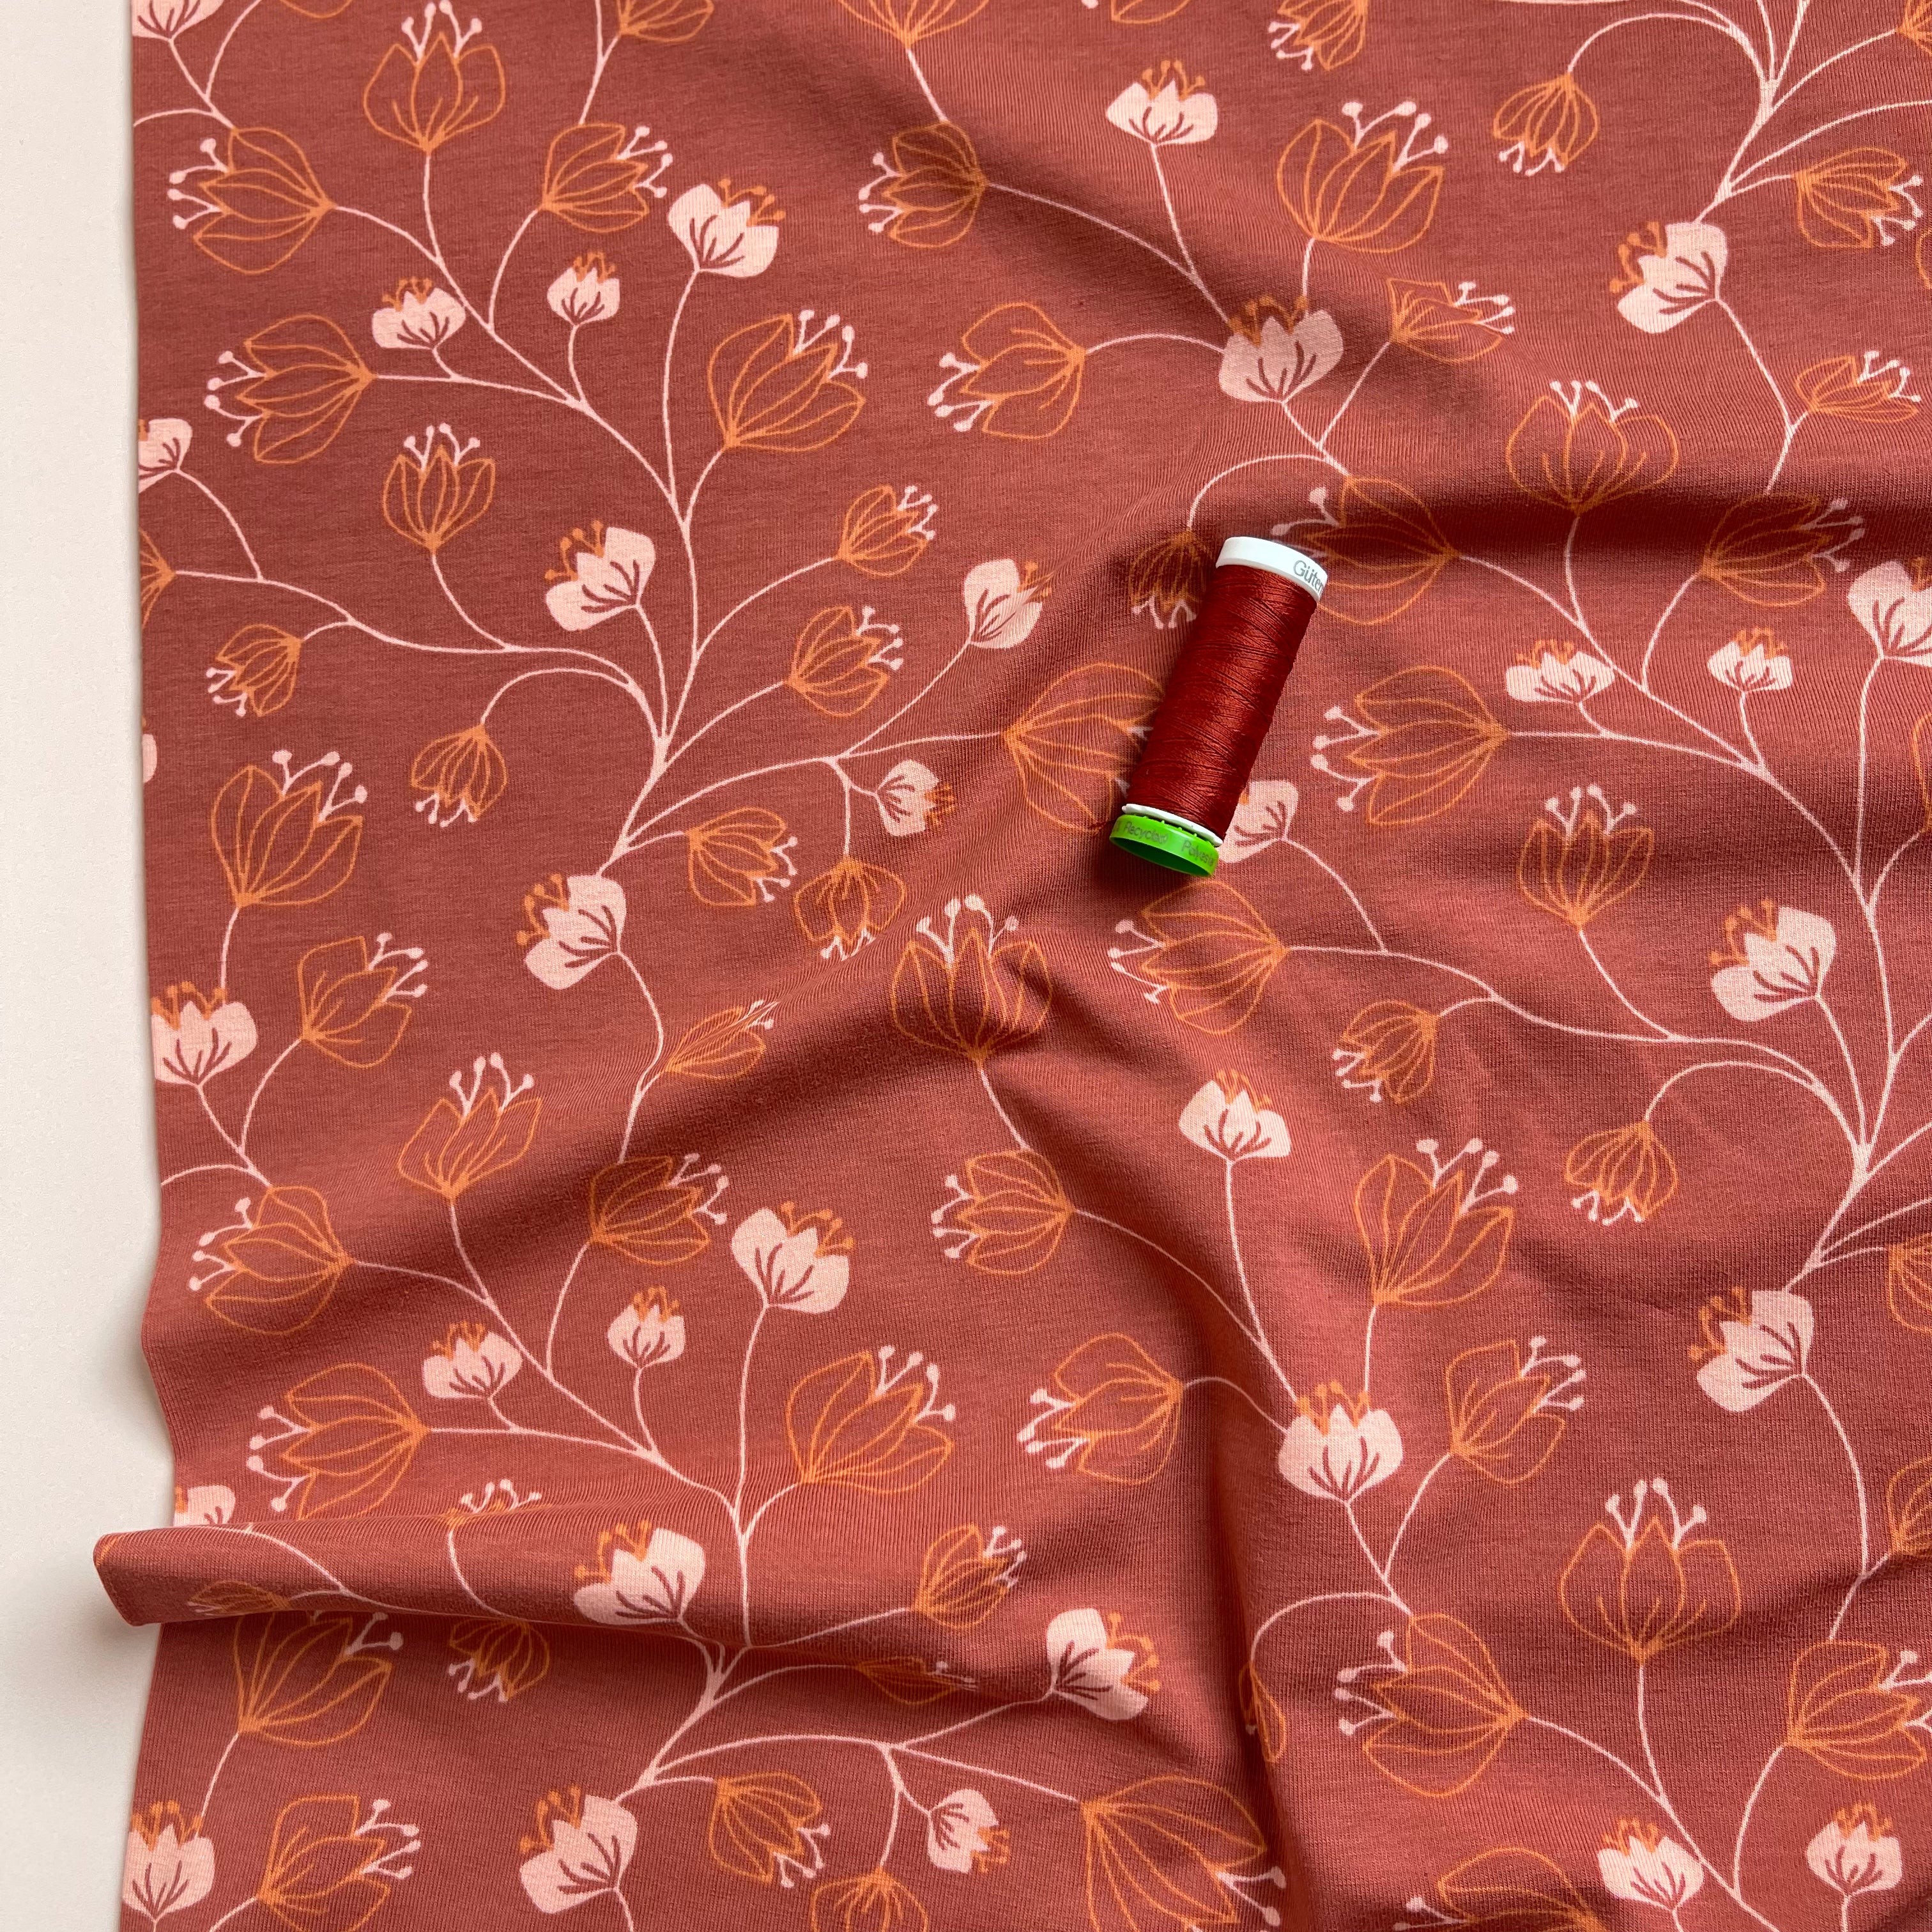 Floral Lines in Cinnamon Cotton Jersey Fabric